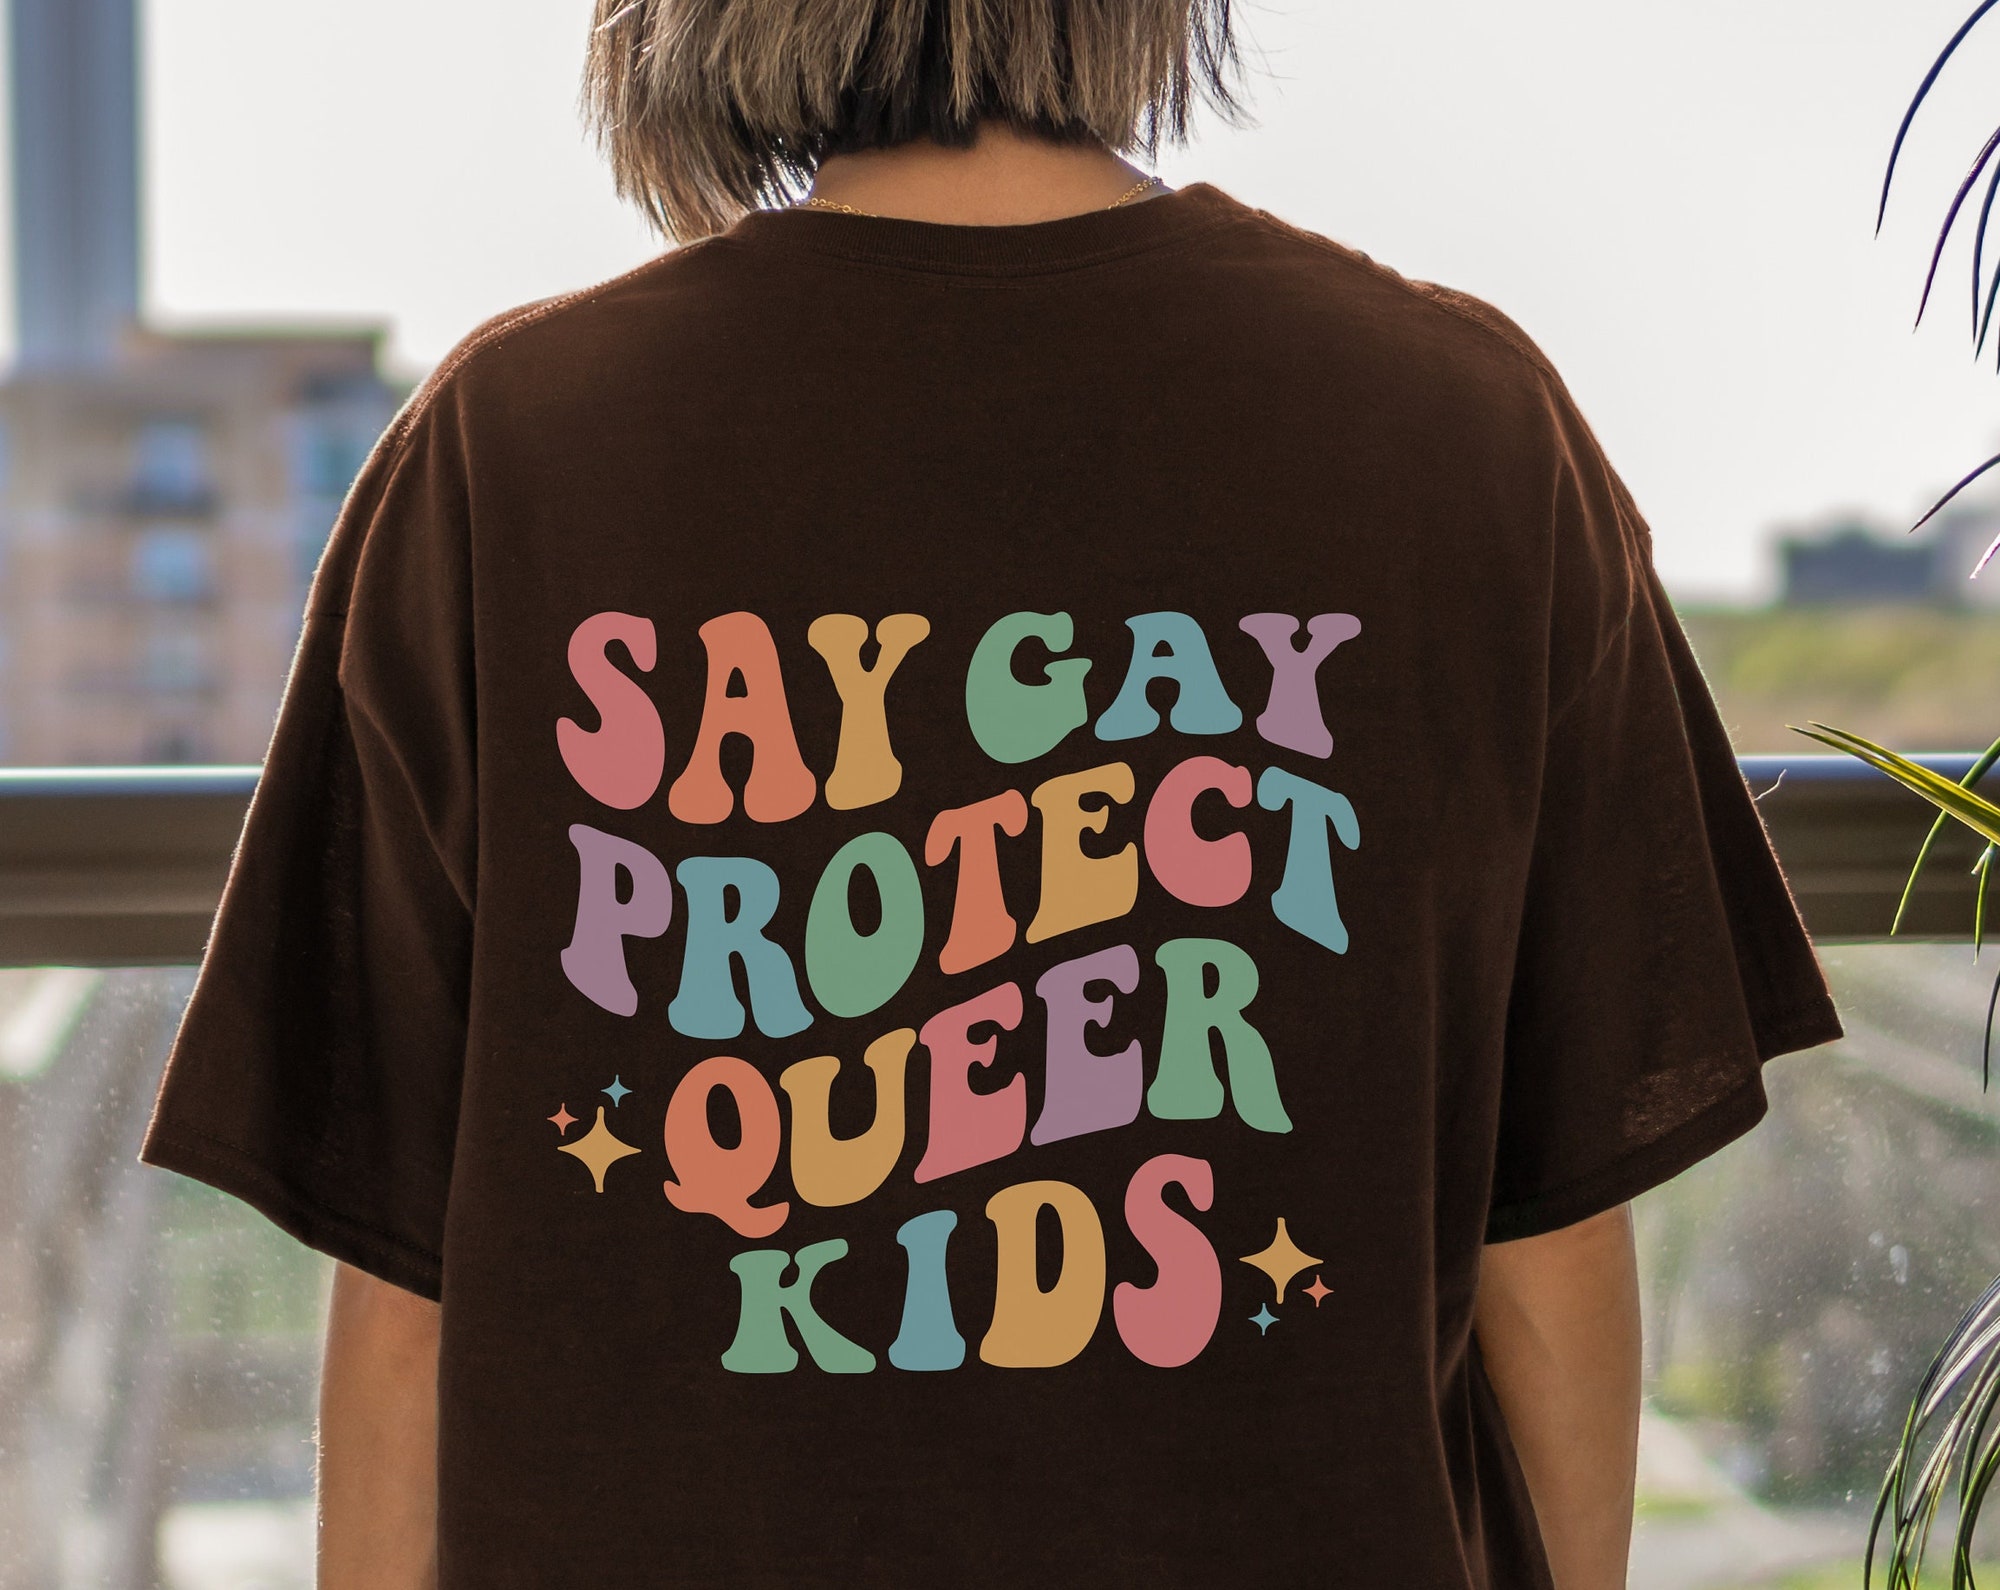 Discover Say Gay Protect Queer Kids T-Shirt